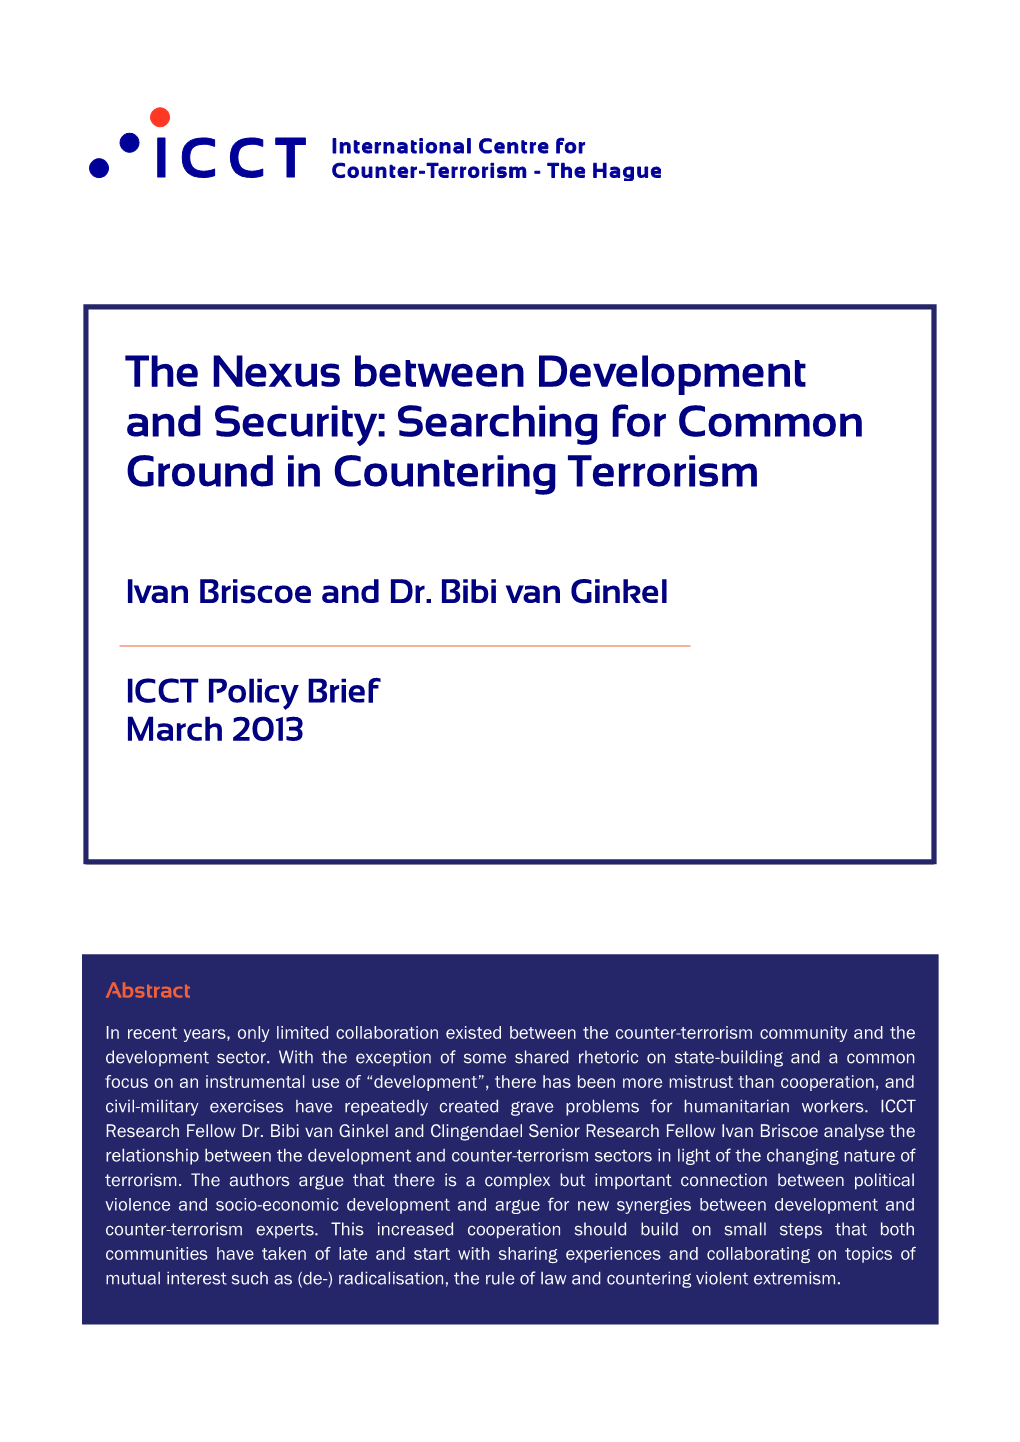 The Nexus Between Development and Security: Searching for Common Ground in Countering Terrorism